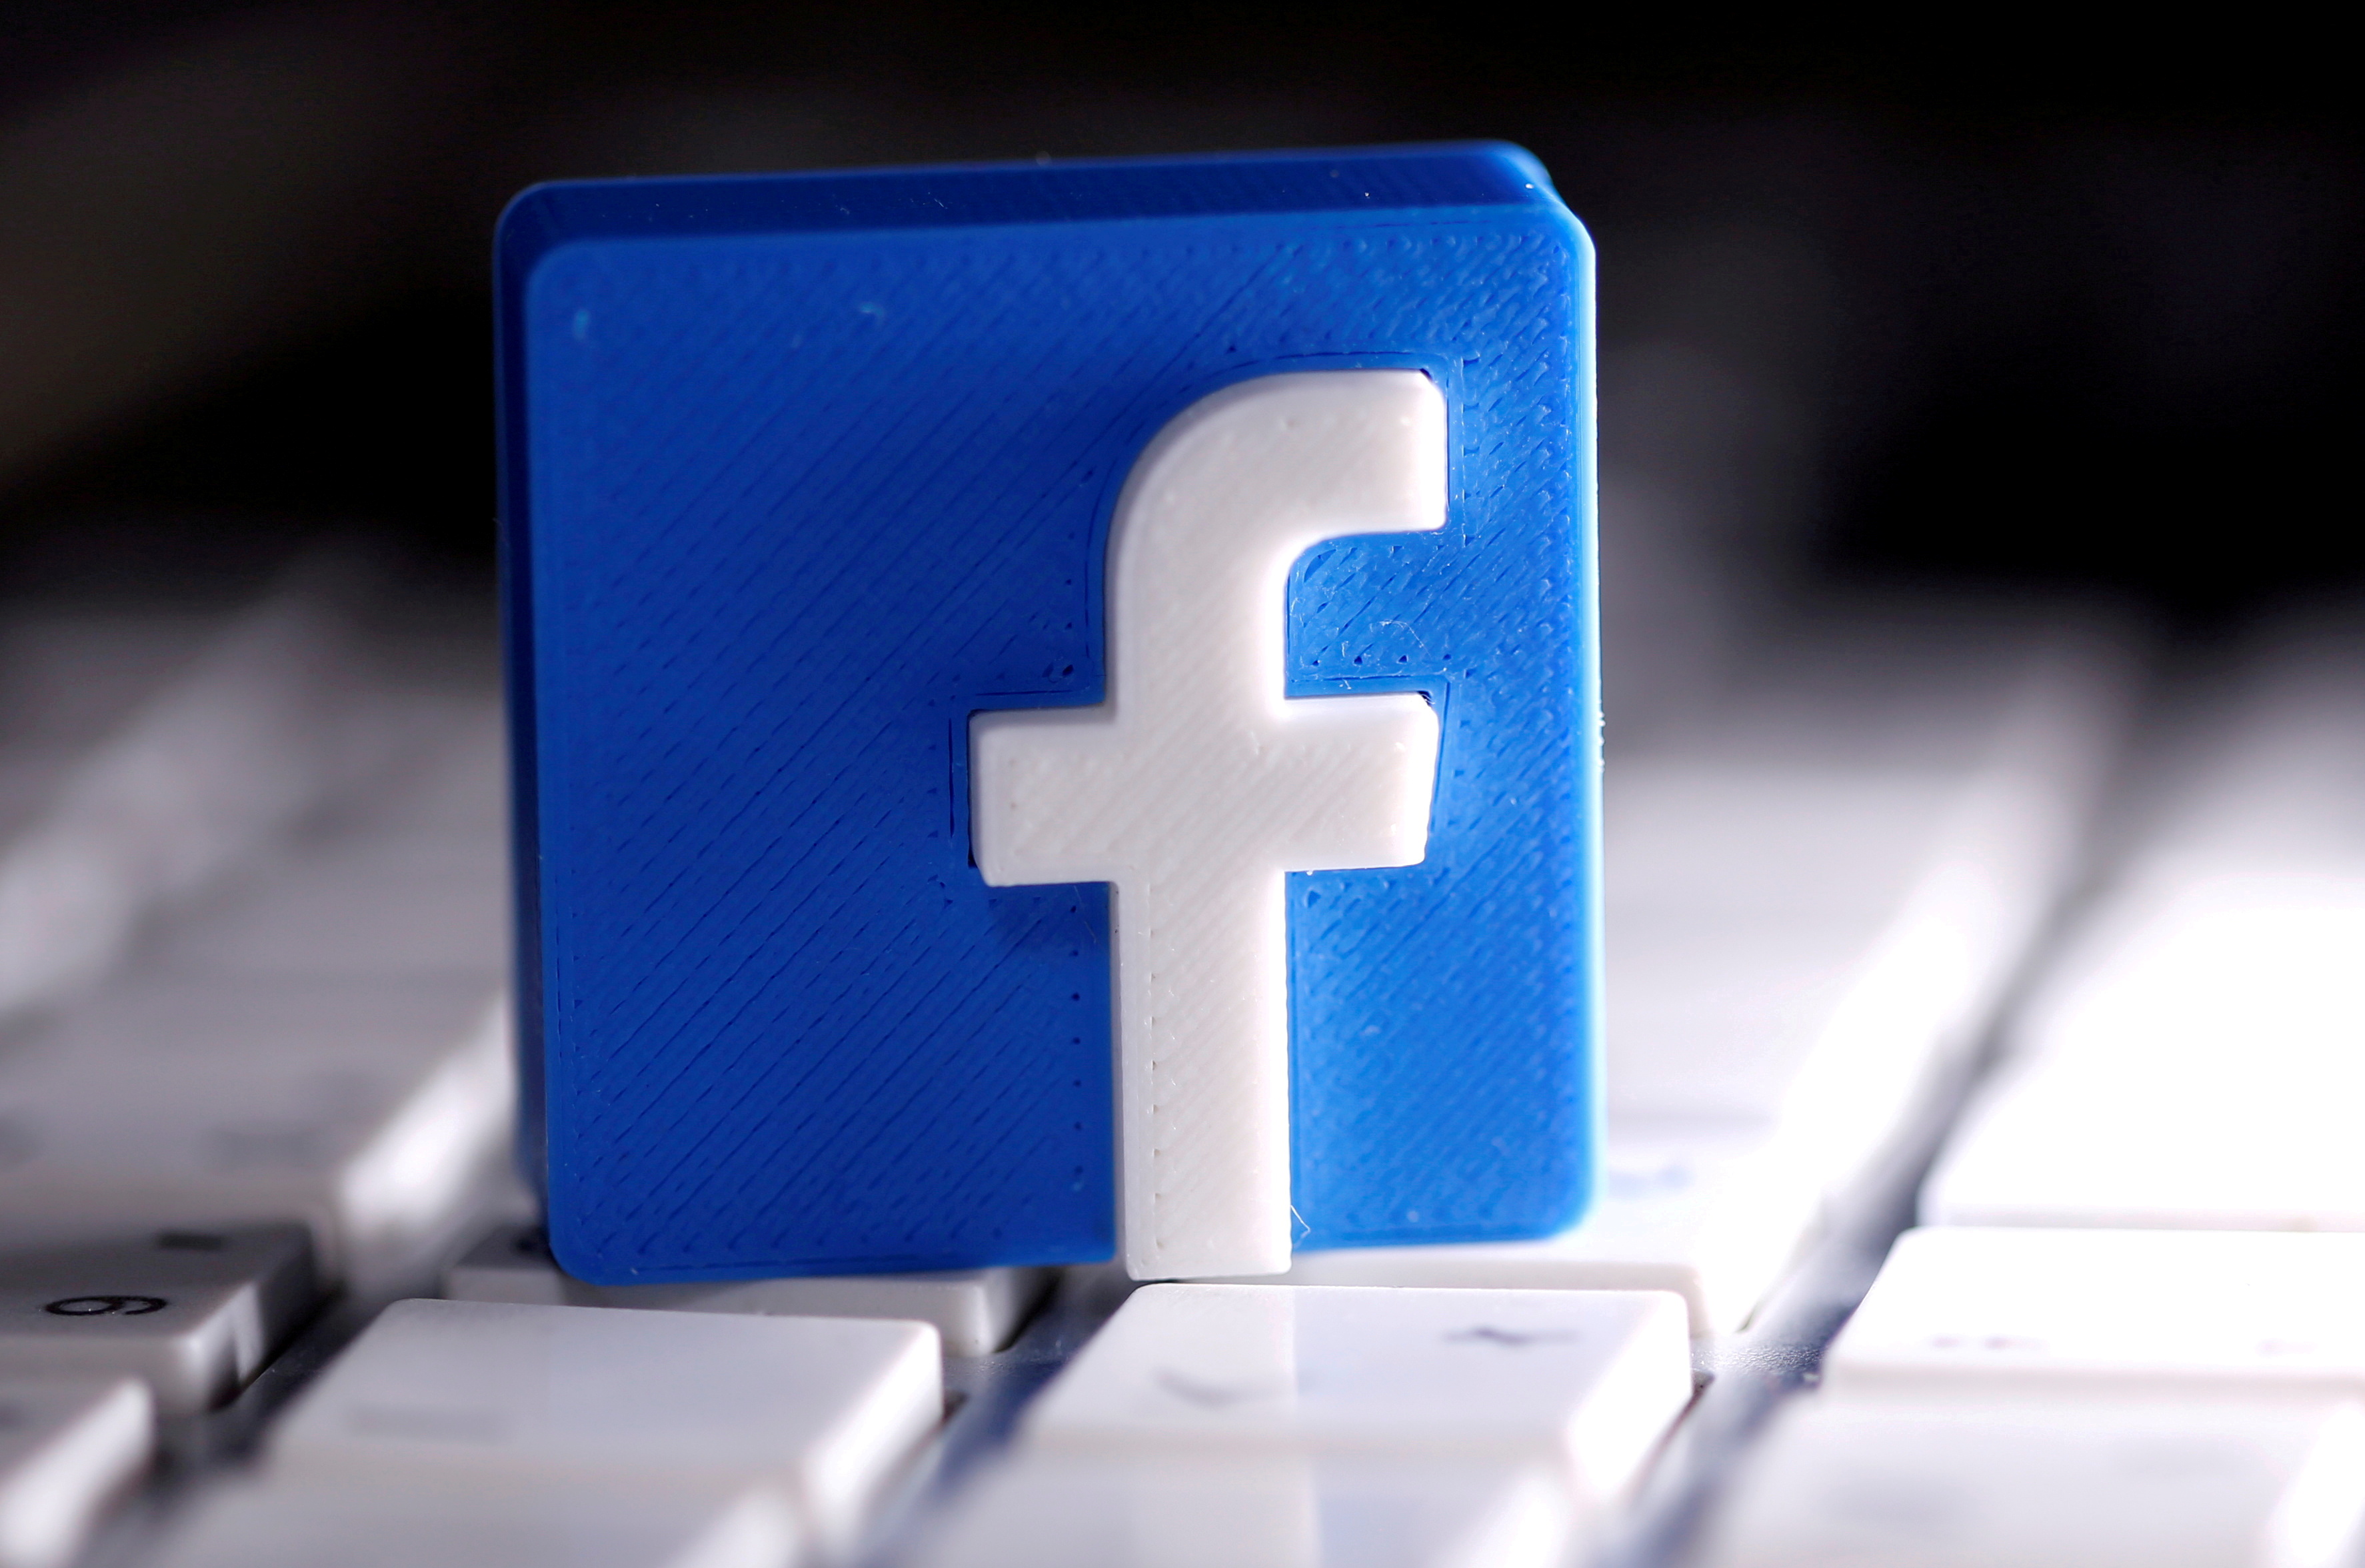 A 3D-printed Facebook logo is seen placed on a keyboard in this illustration taken March 25, 2020. REUTERS/Dado Ruvic/Illustration/File Photo